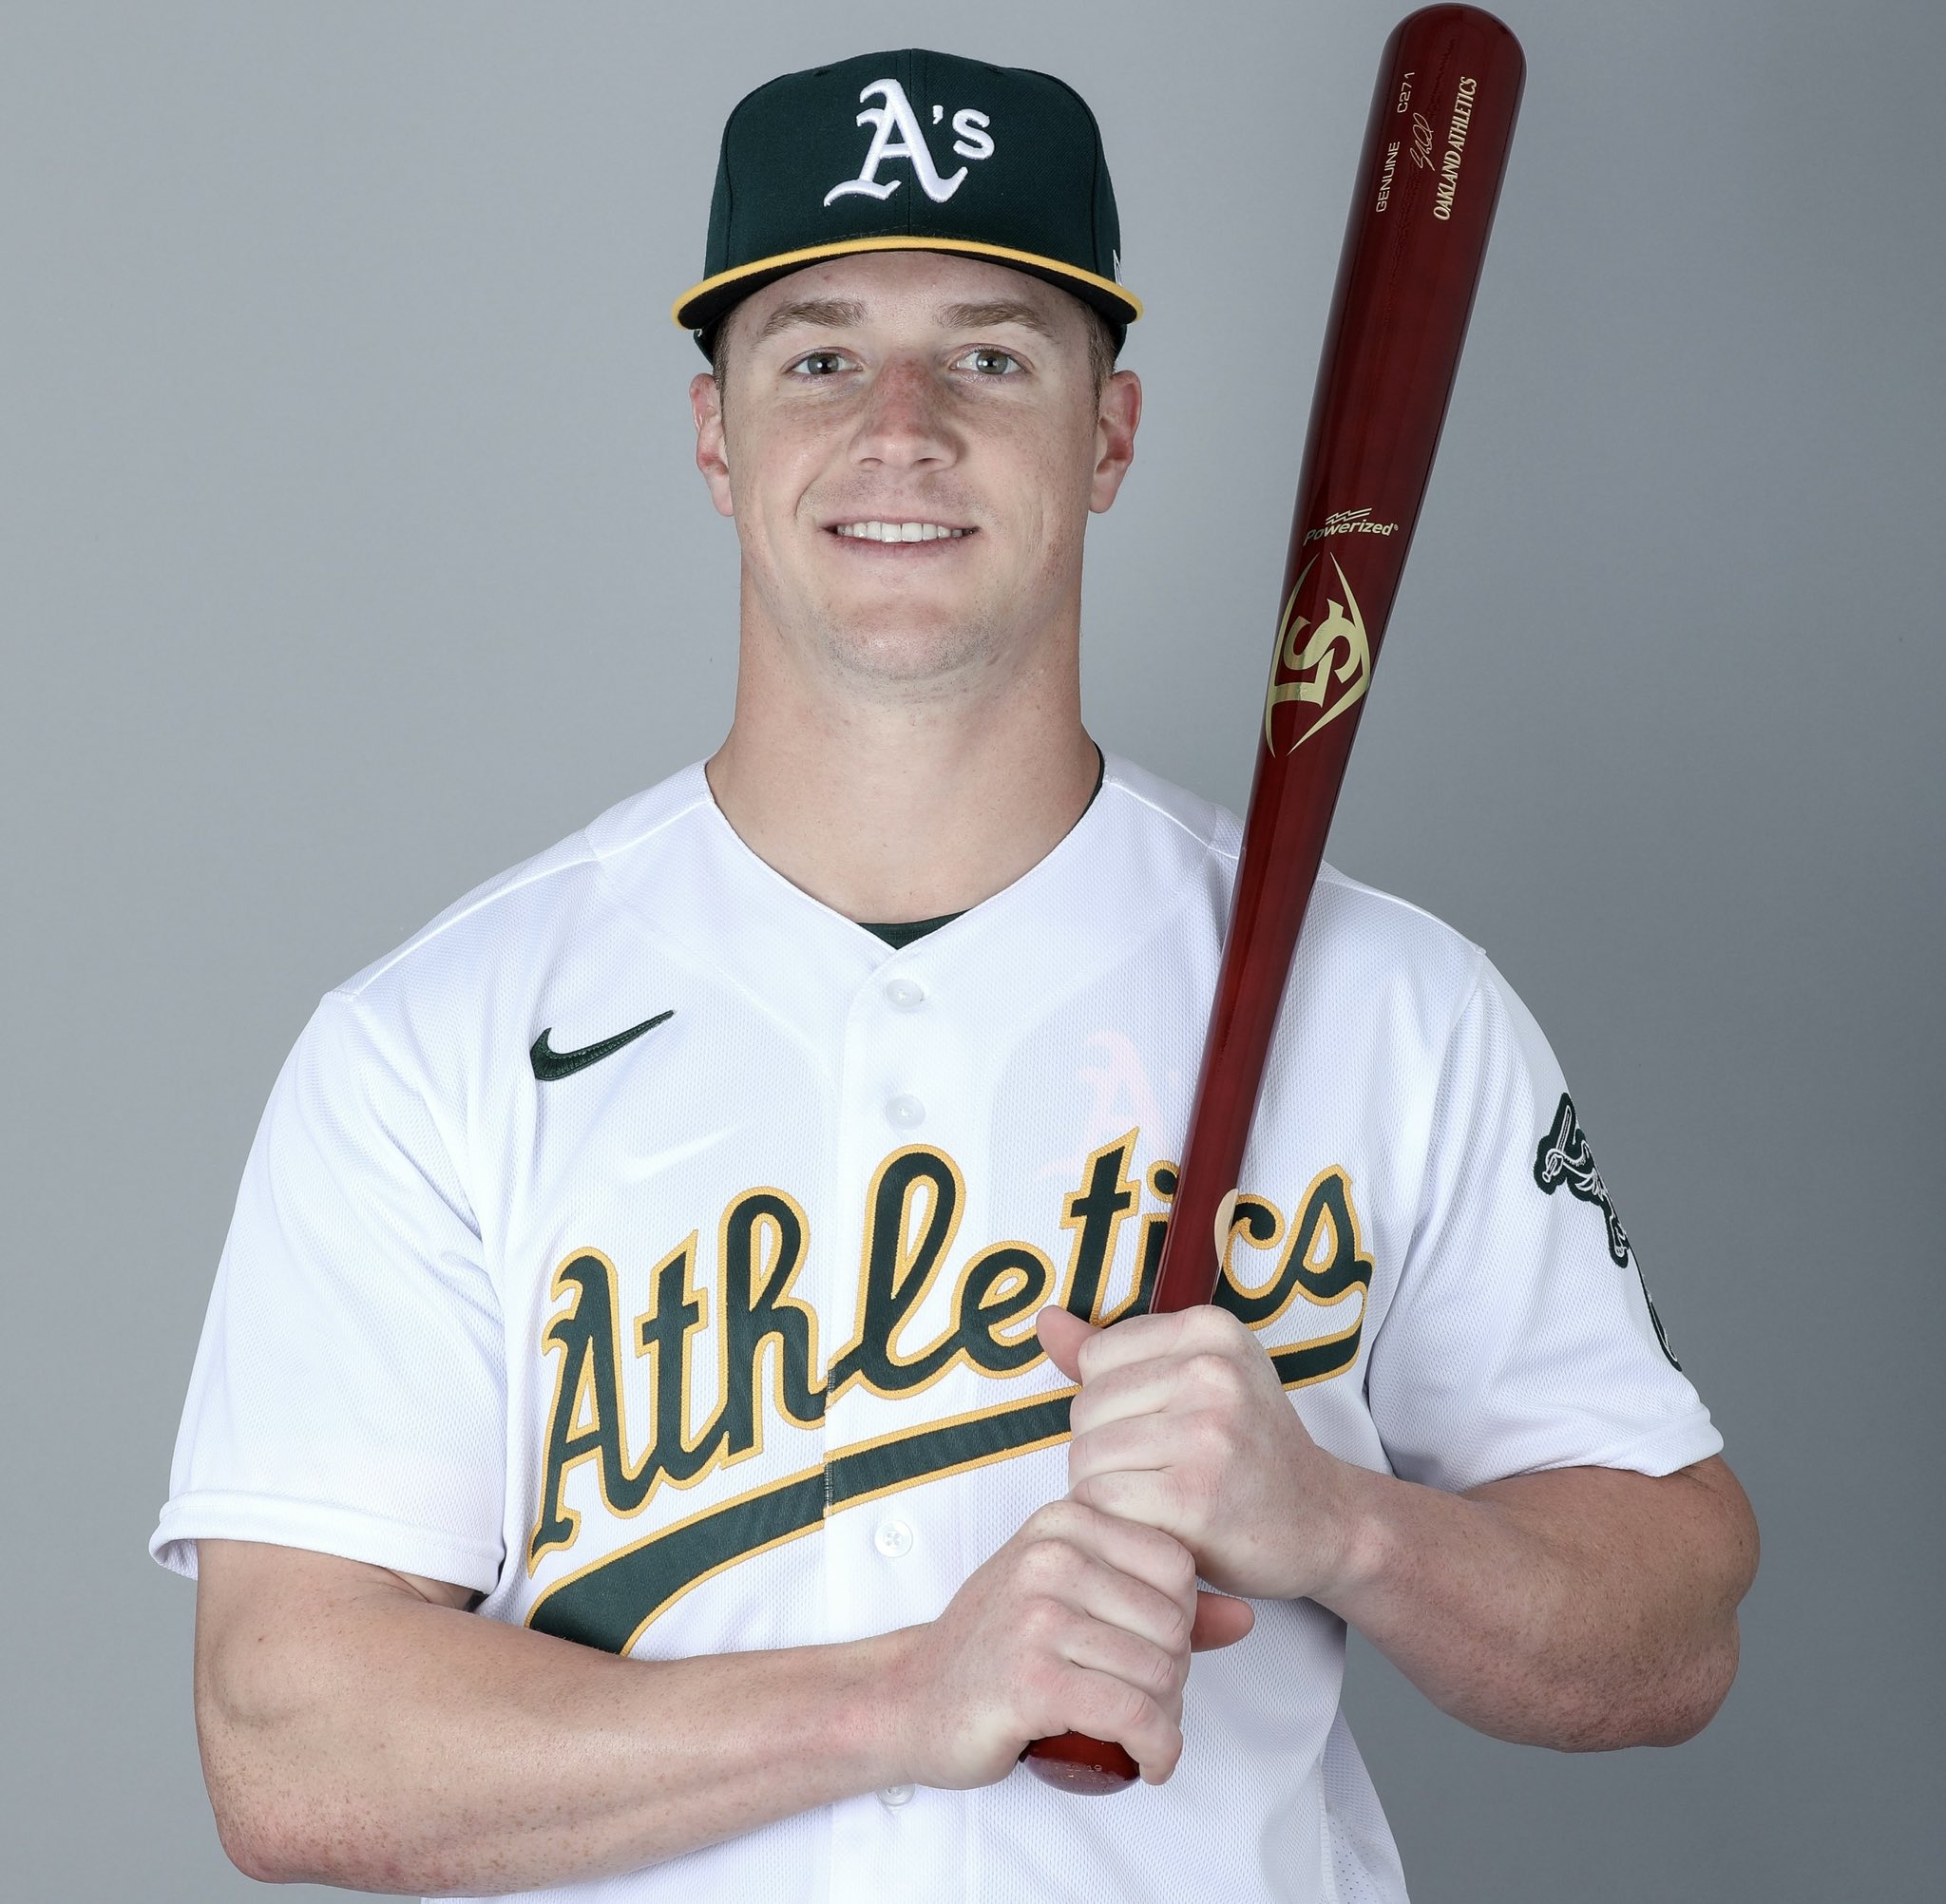 Cubs ™️ on "Last night the Chicago Cubs traded LHP Andrew Chafin to the Oakland Athletics in return for minor league OF Greg Deichmann minor league RHP Daniel Palencia. #